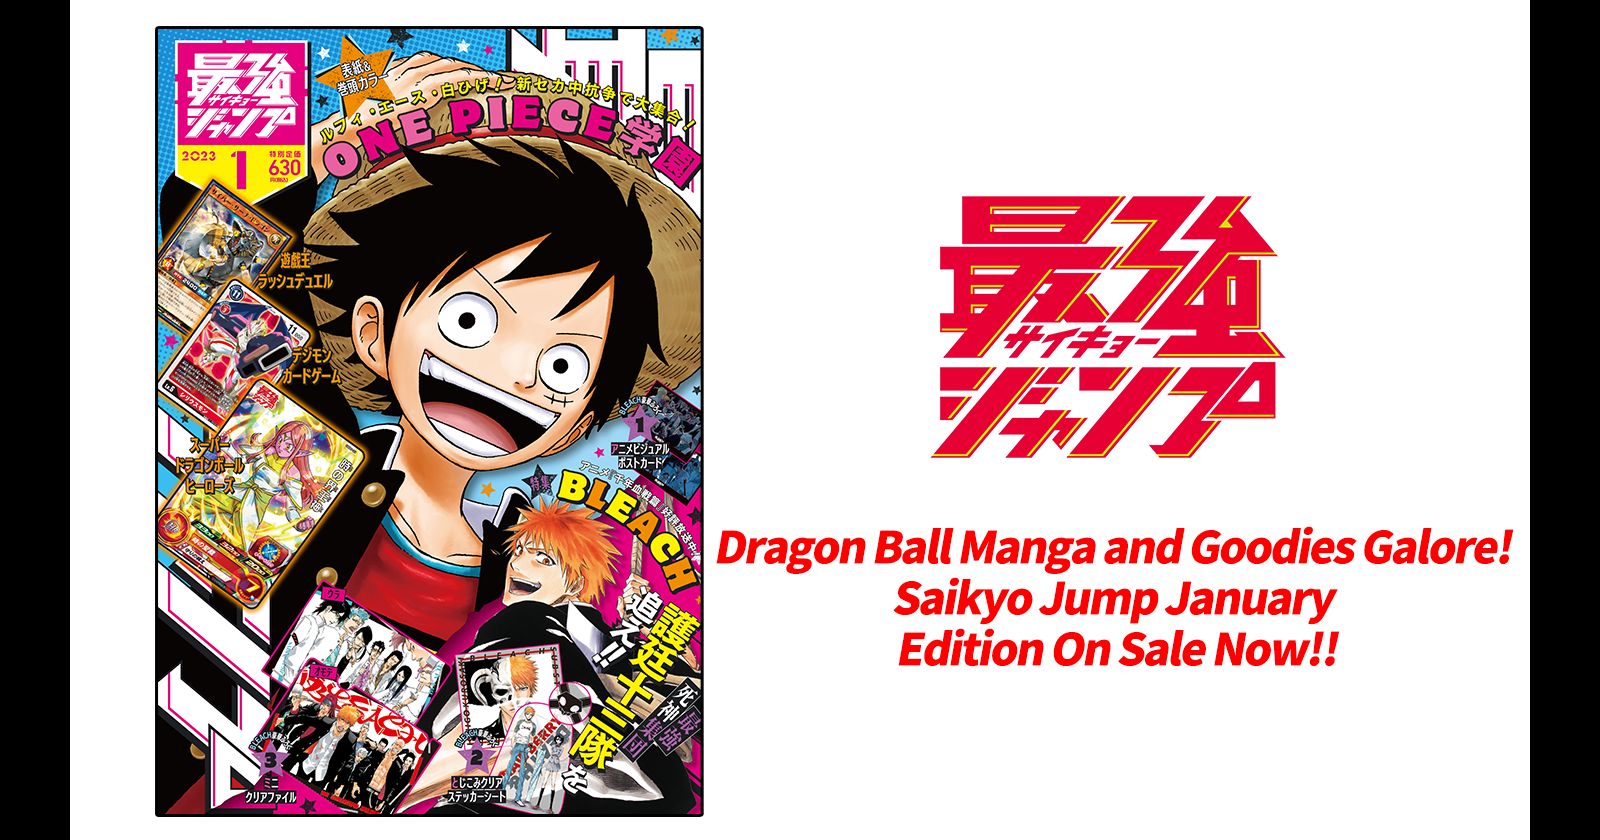 The January special issue of Saikyo Jump, which is currently on sale, is full of "Dragon Ball" fur and manga!